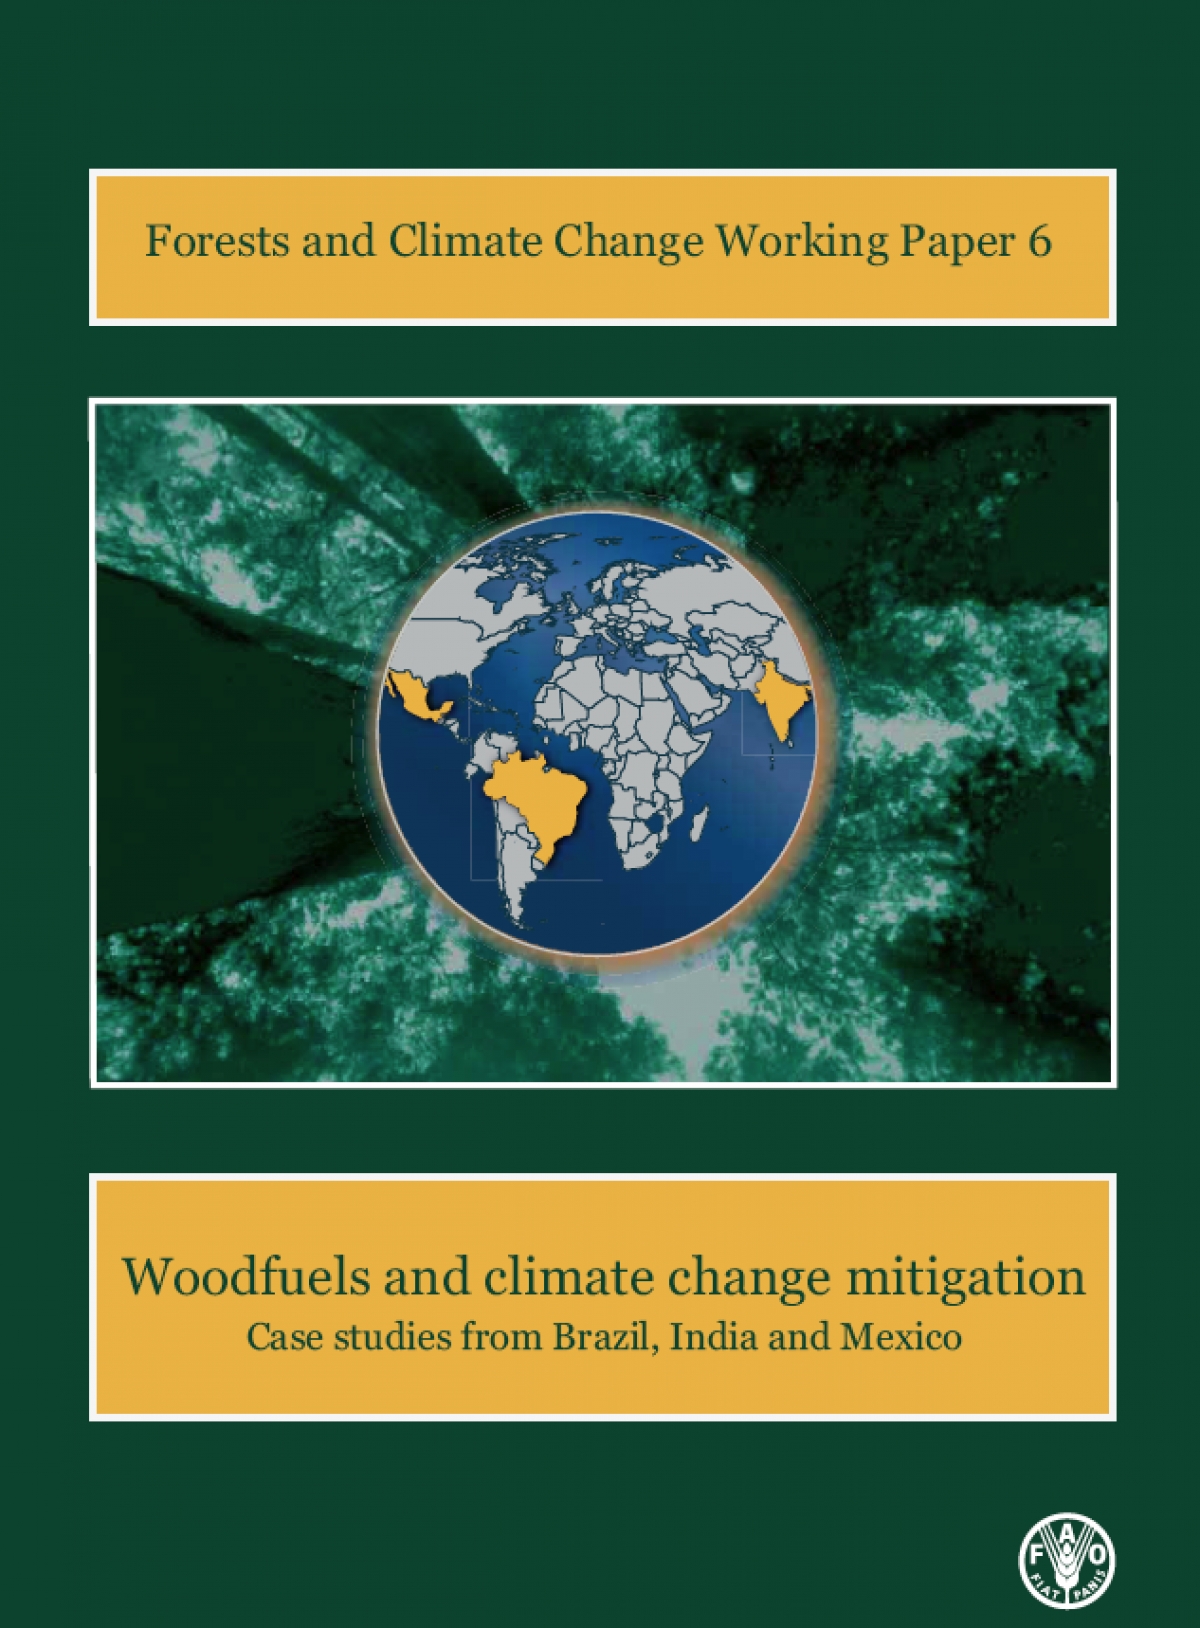 literature review on climate change